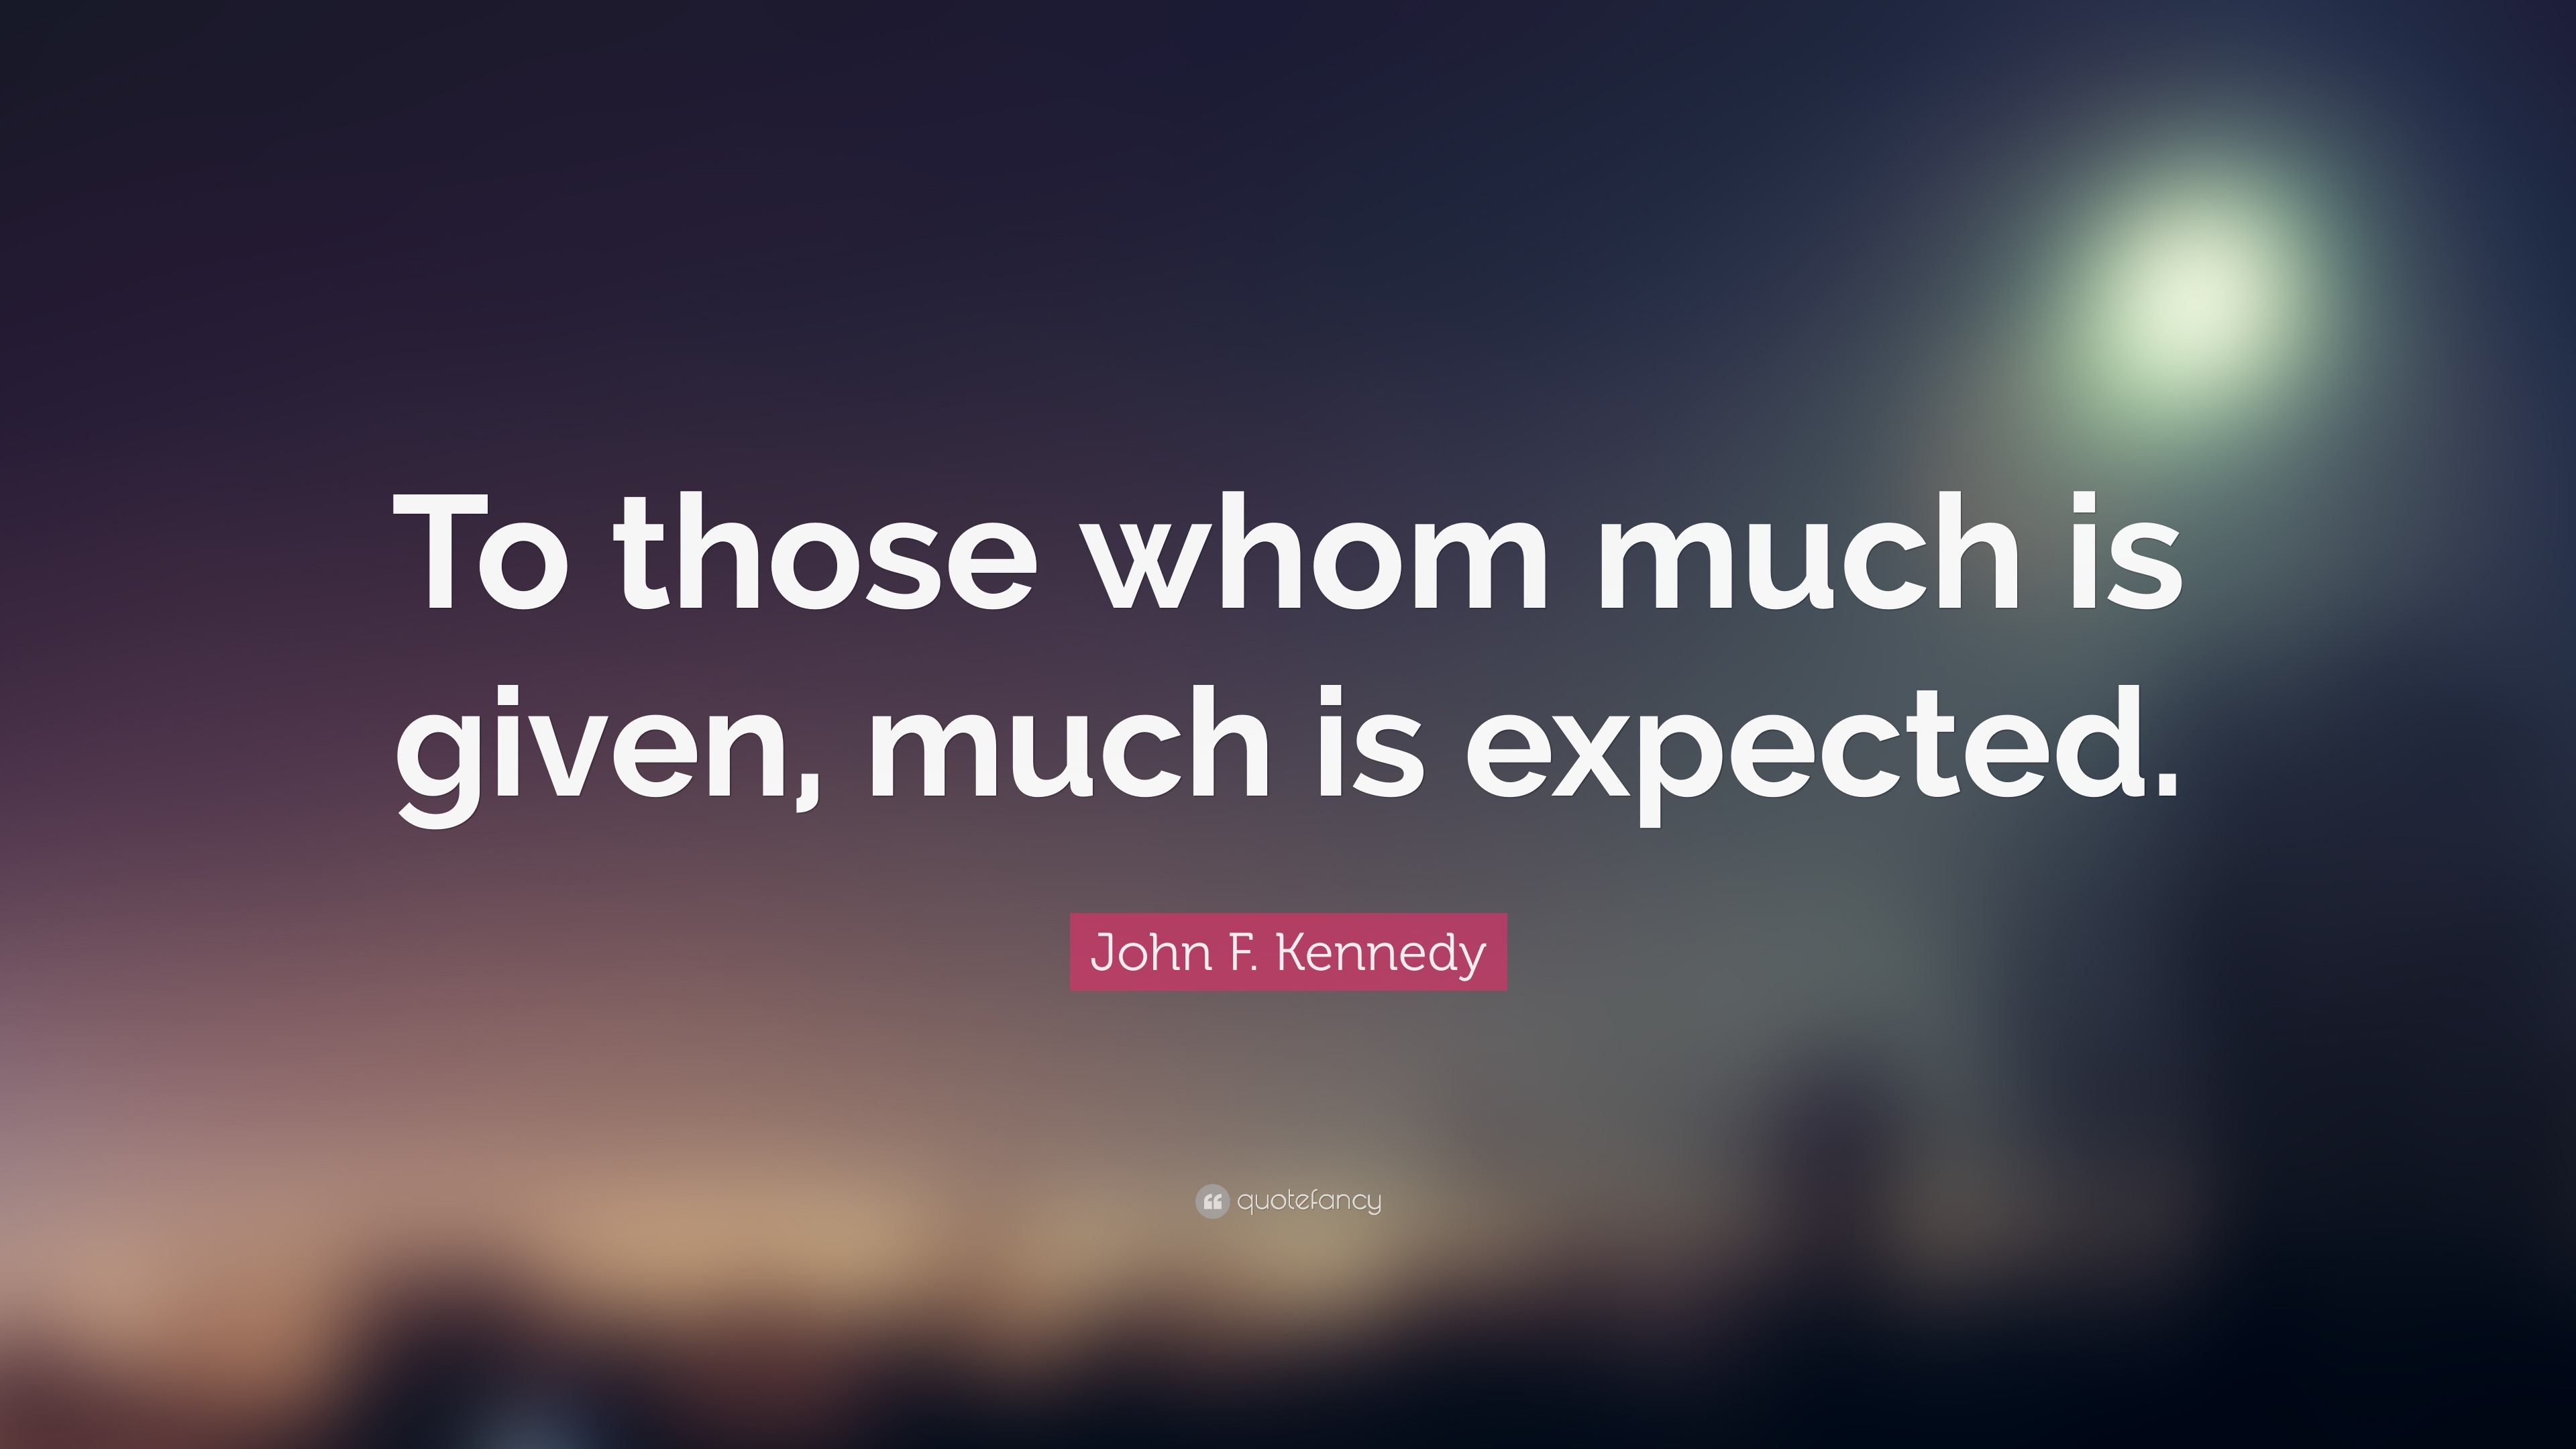 John F. Kennedy Quote: “To those whom much is given, much is expected.”